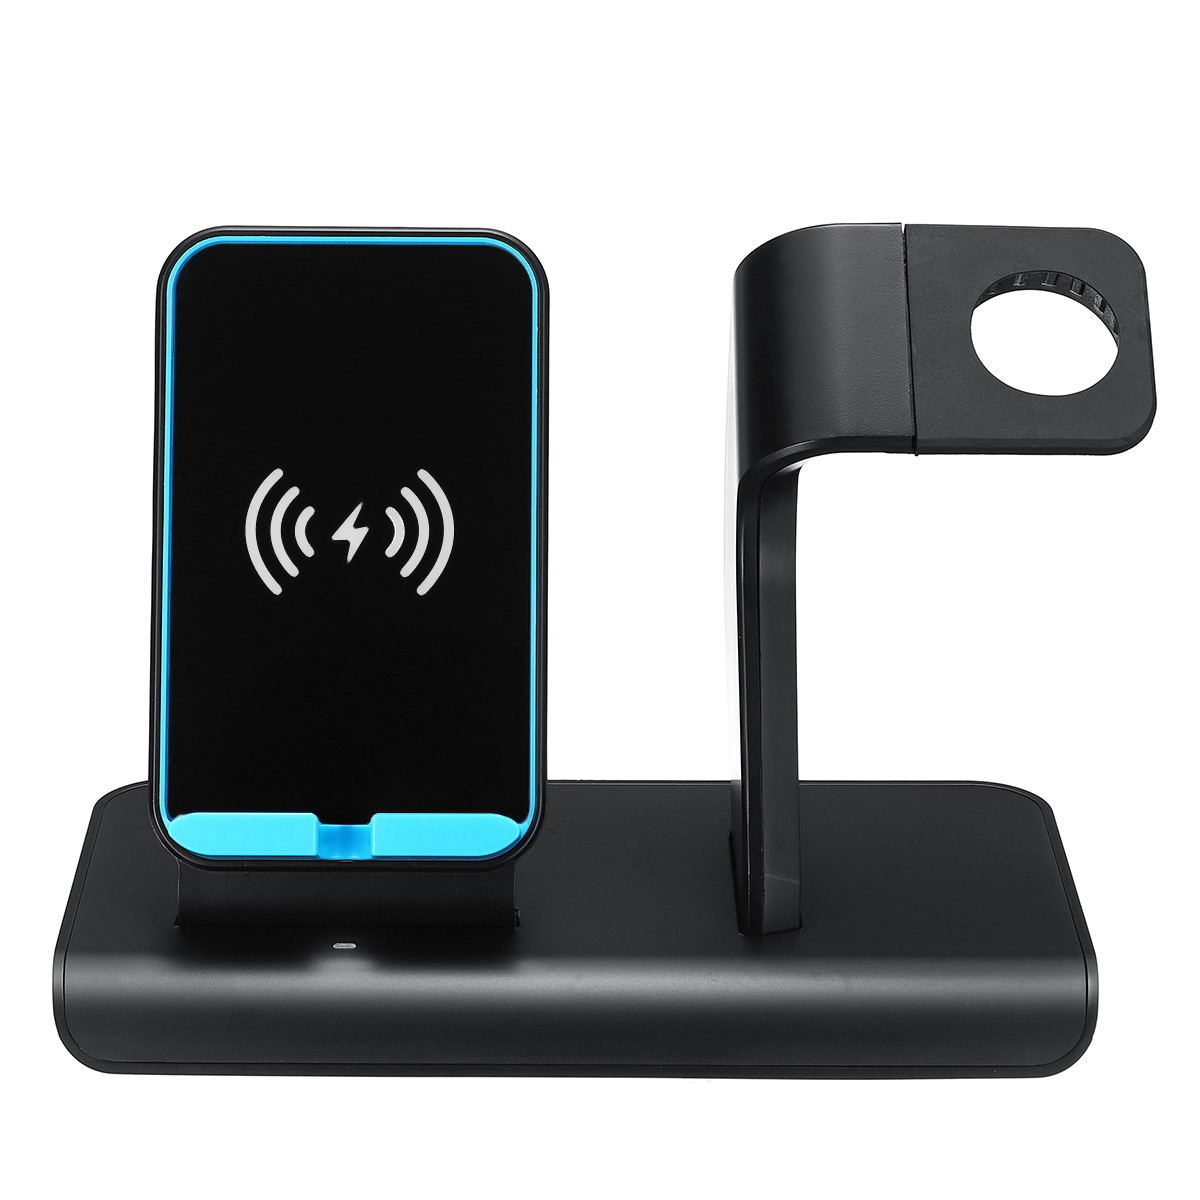 10W-2-In-1-Qi-Wireless-Charger-Fast-Charging-Phone-Watch-Holder-For-iPhone-Samsung-Huawei-Apple-Watc-1416645-4